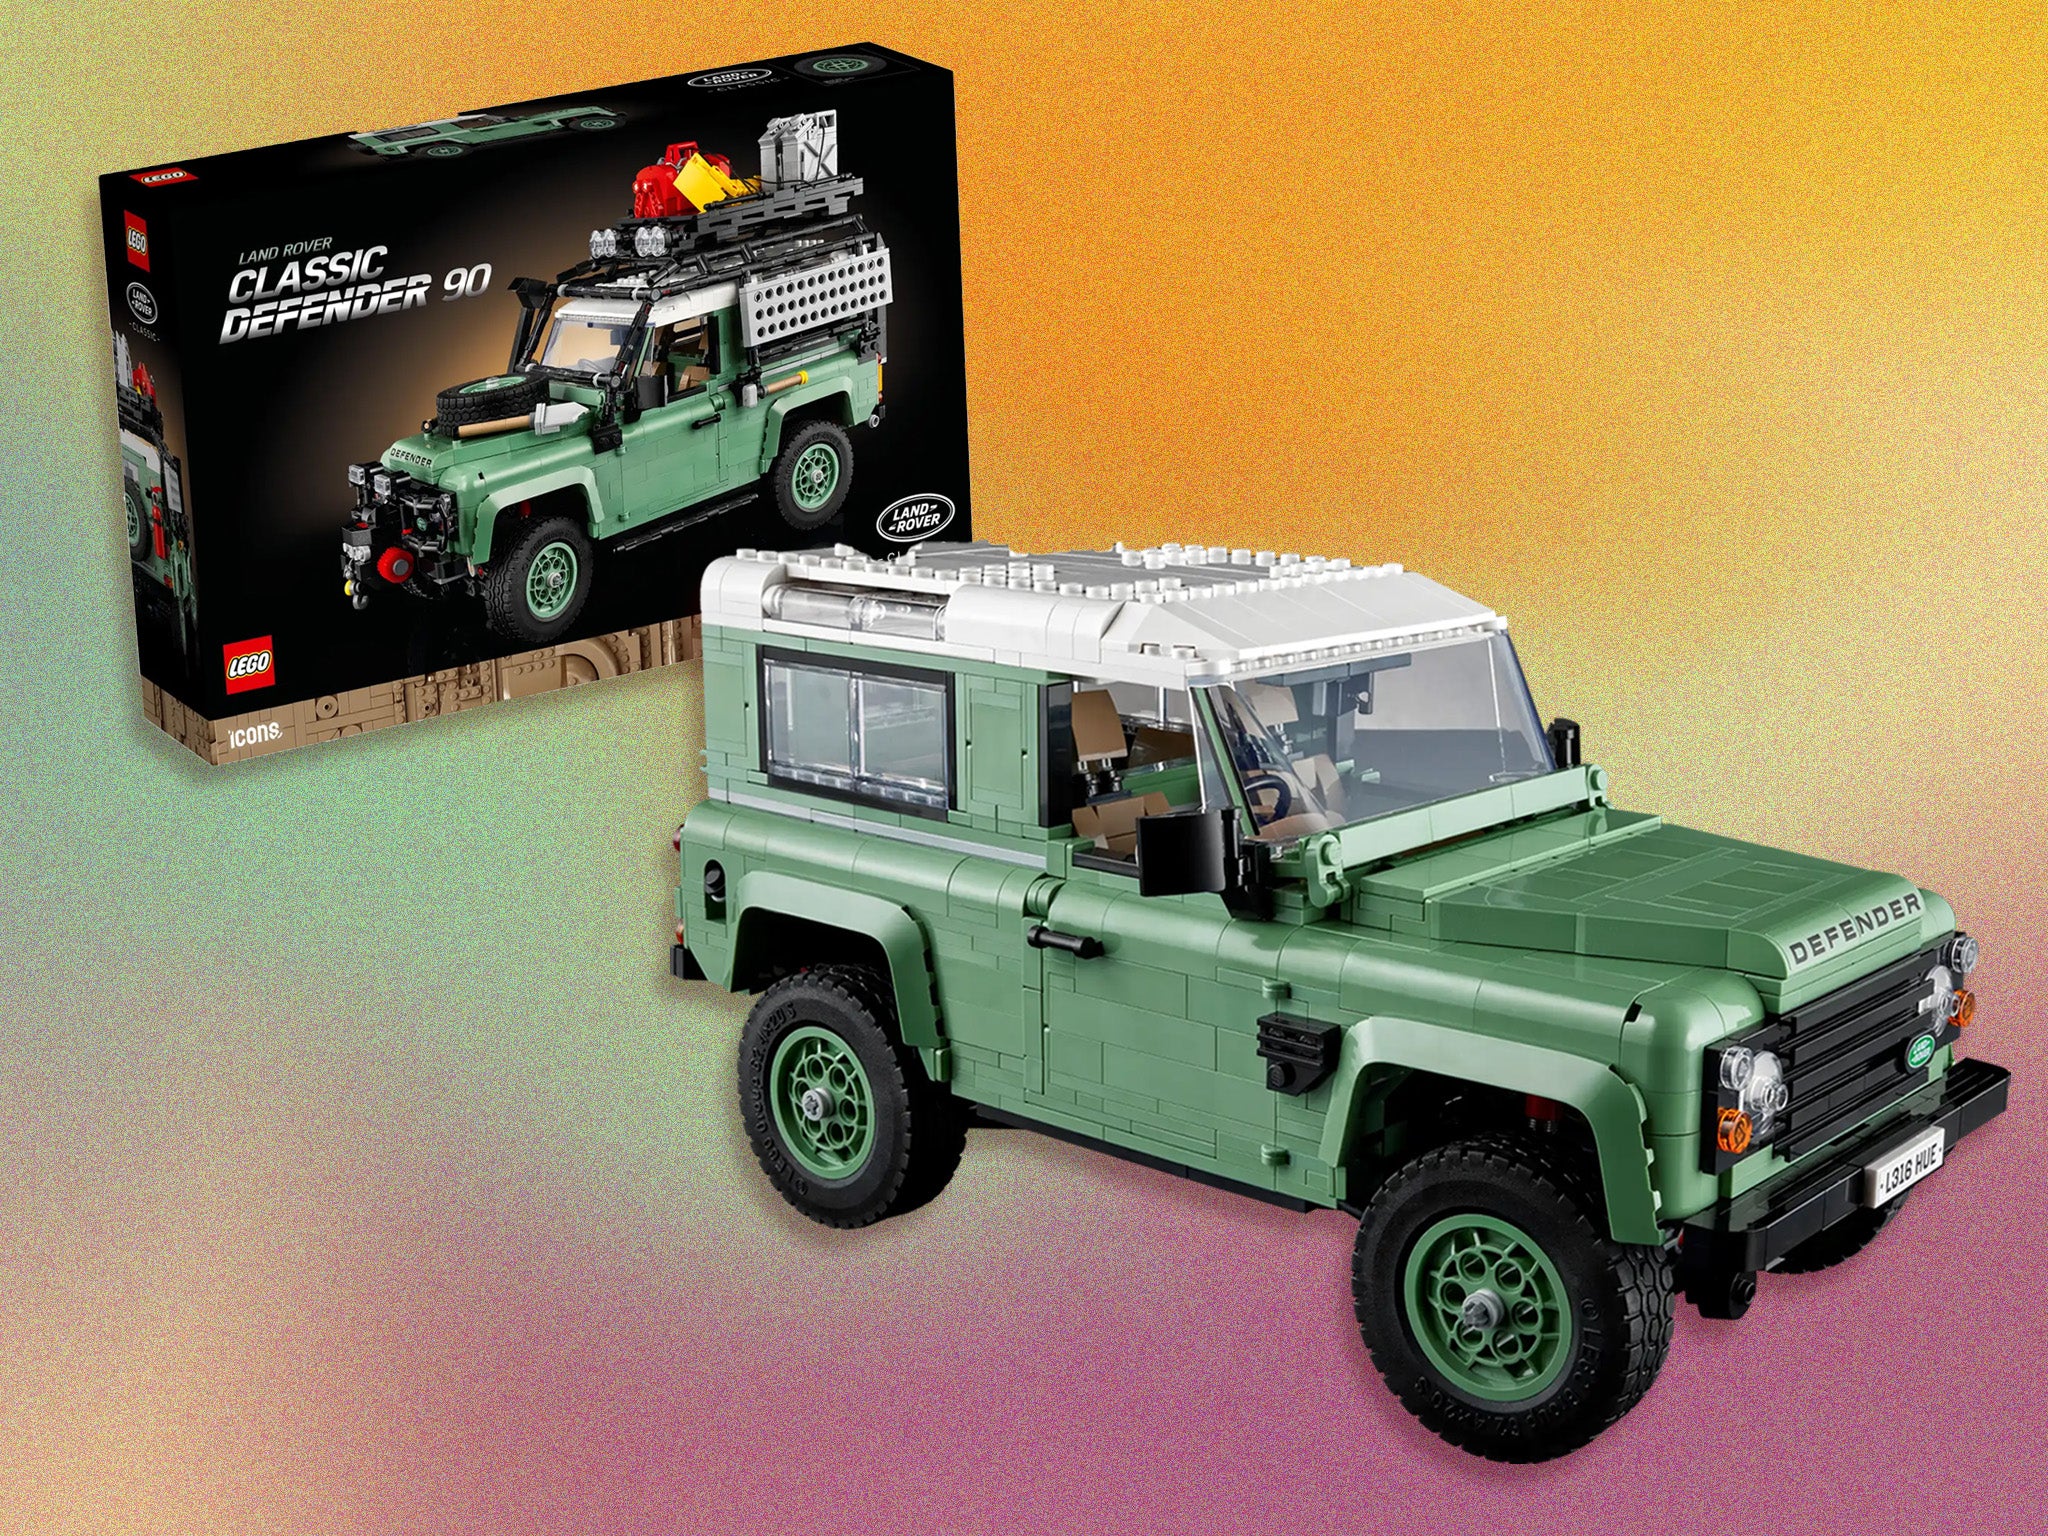 Lego's Land Rover classic defender 90 will take your collection up